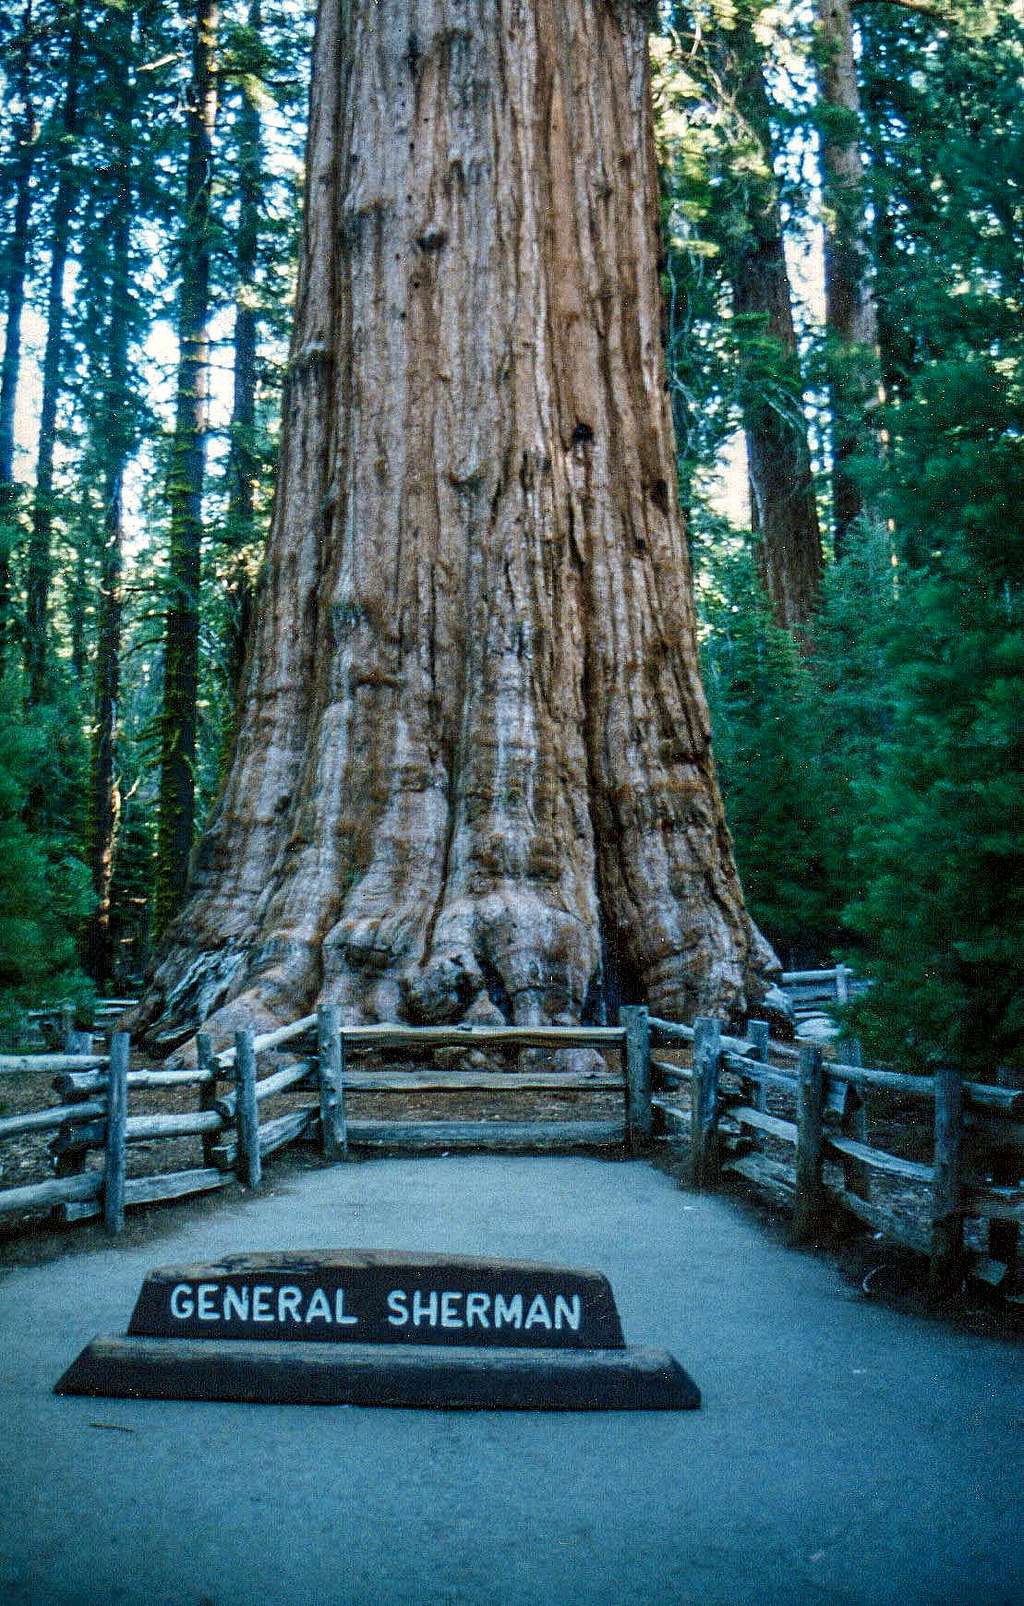 Biggest tree in the world